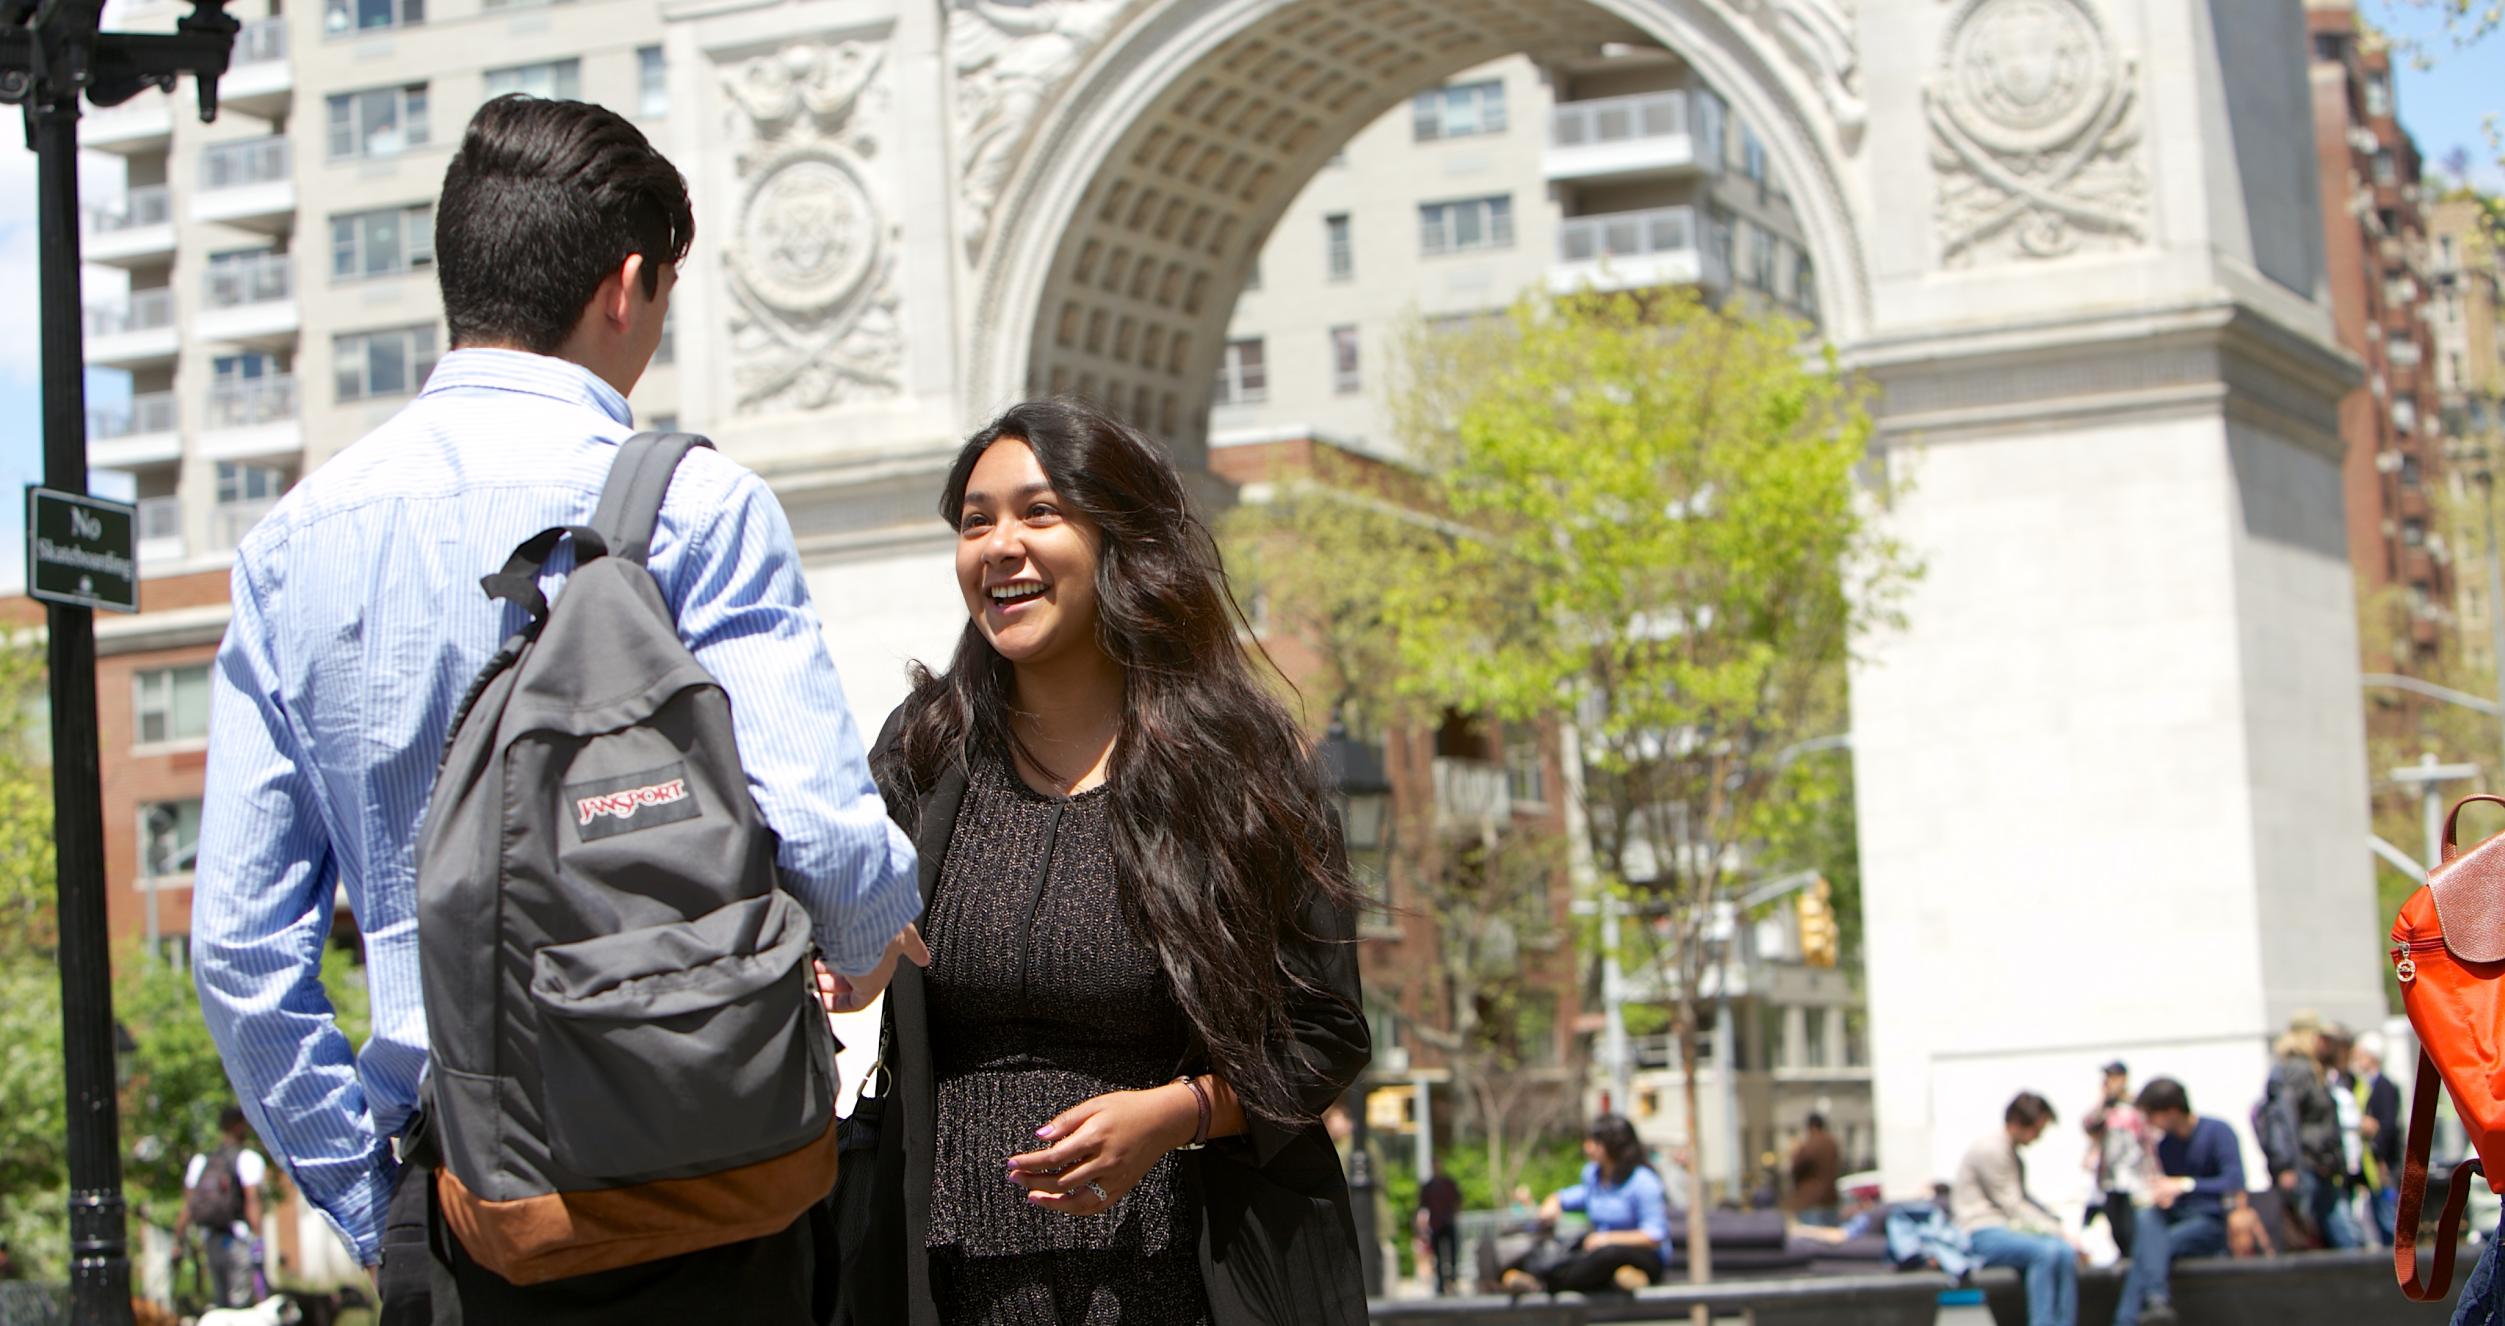 Students chat in front of the arch at Washington Square Park